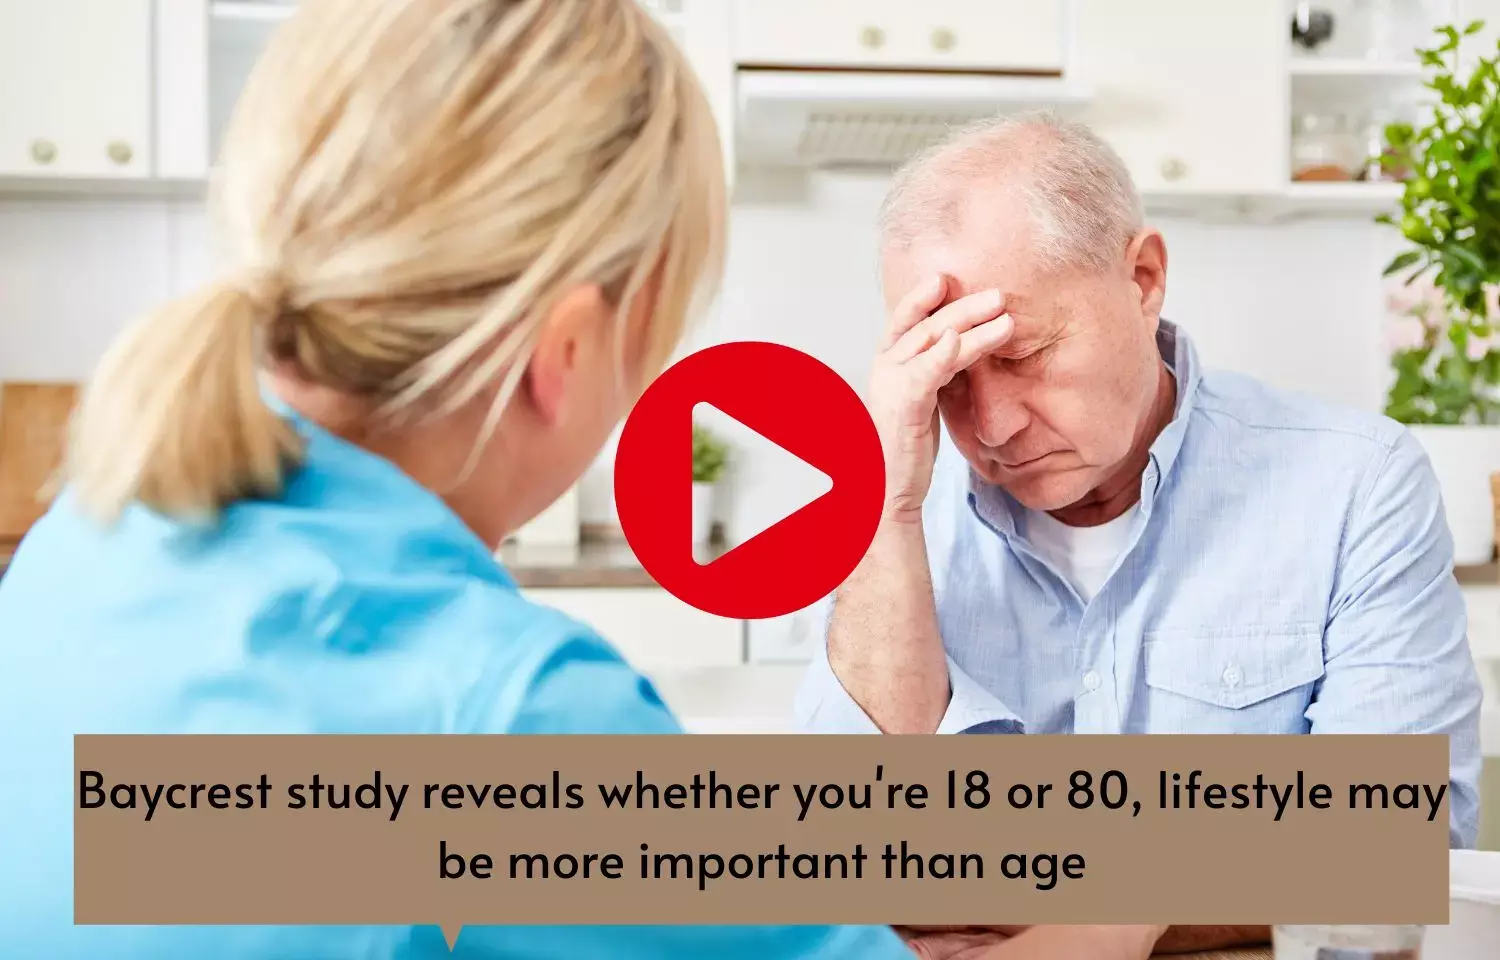 Baycrest study reveals whether youre 18 or 80, lifestyle may be more important than age